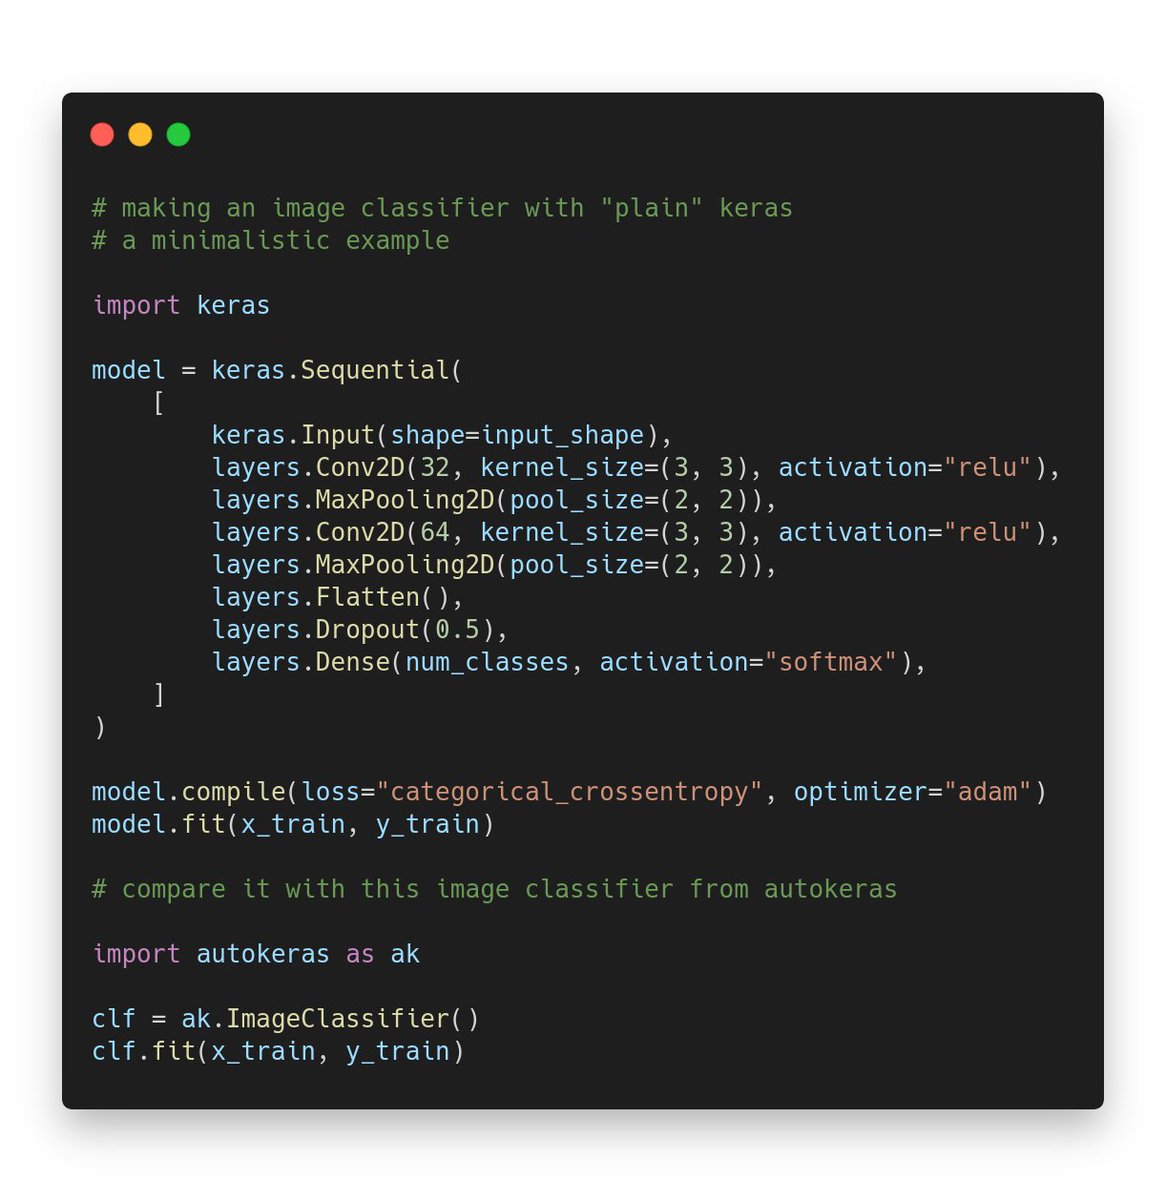  Auto-Keras is an AutoML framework specifically designed for deep learning with Keras. < https://autokeras.com/ >Instead of manually designing a neural network, you can use Auto-Keras predefined "meta-models" and it will take care of finding the best architecture: